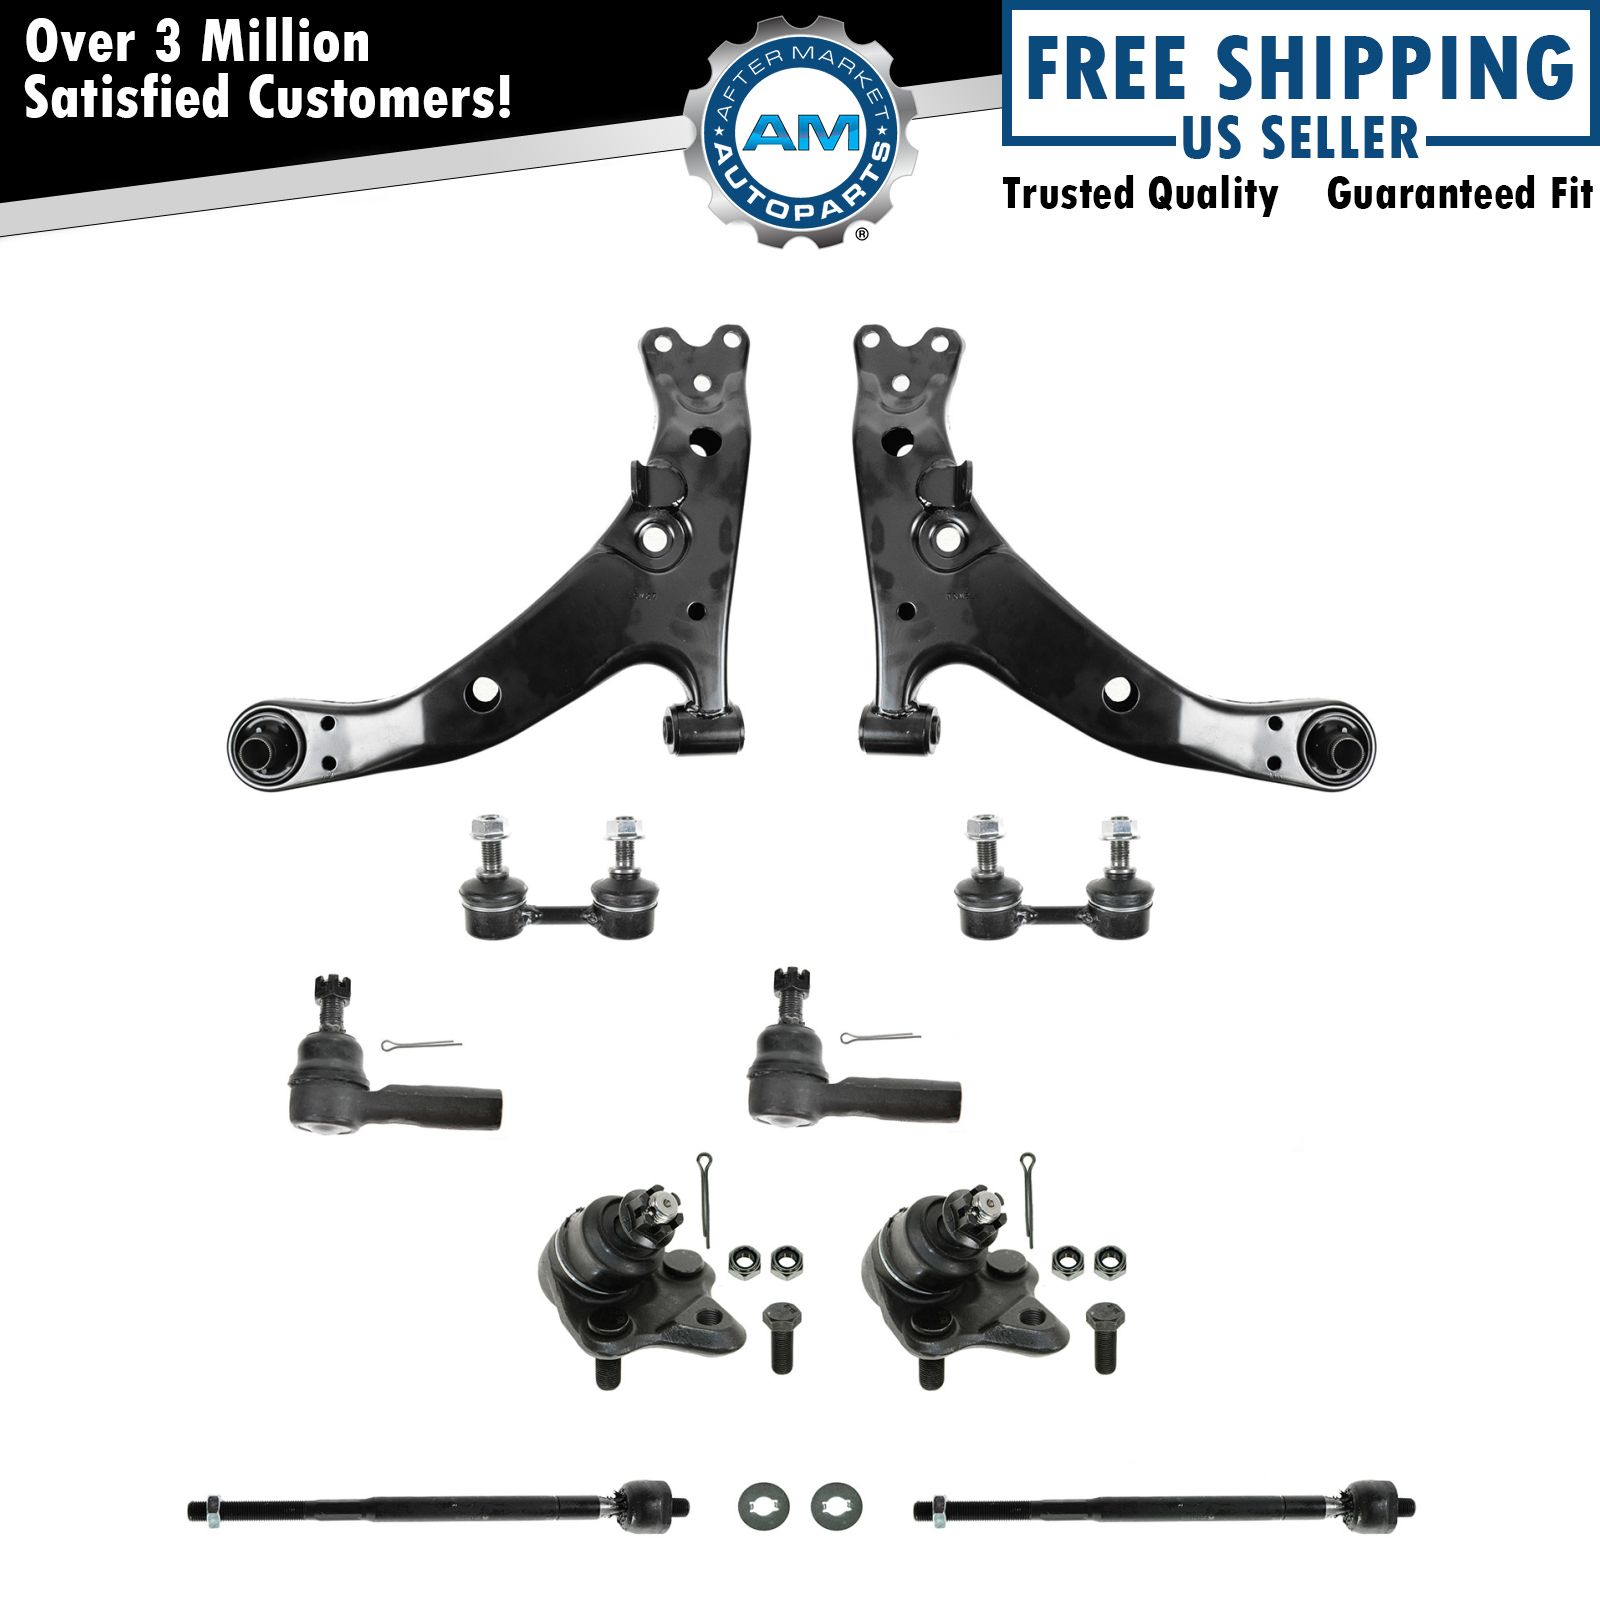 10 Piece Steering Suspension Kit Set Front for 96-02 Toyota Corolla NEW